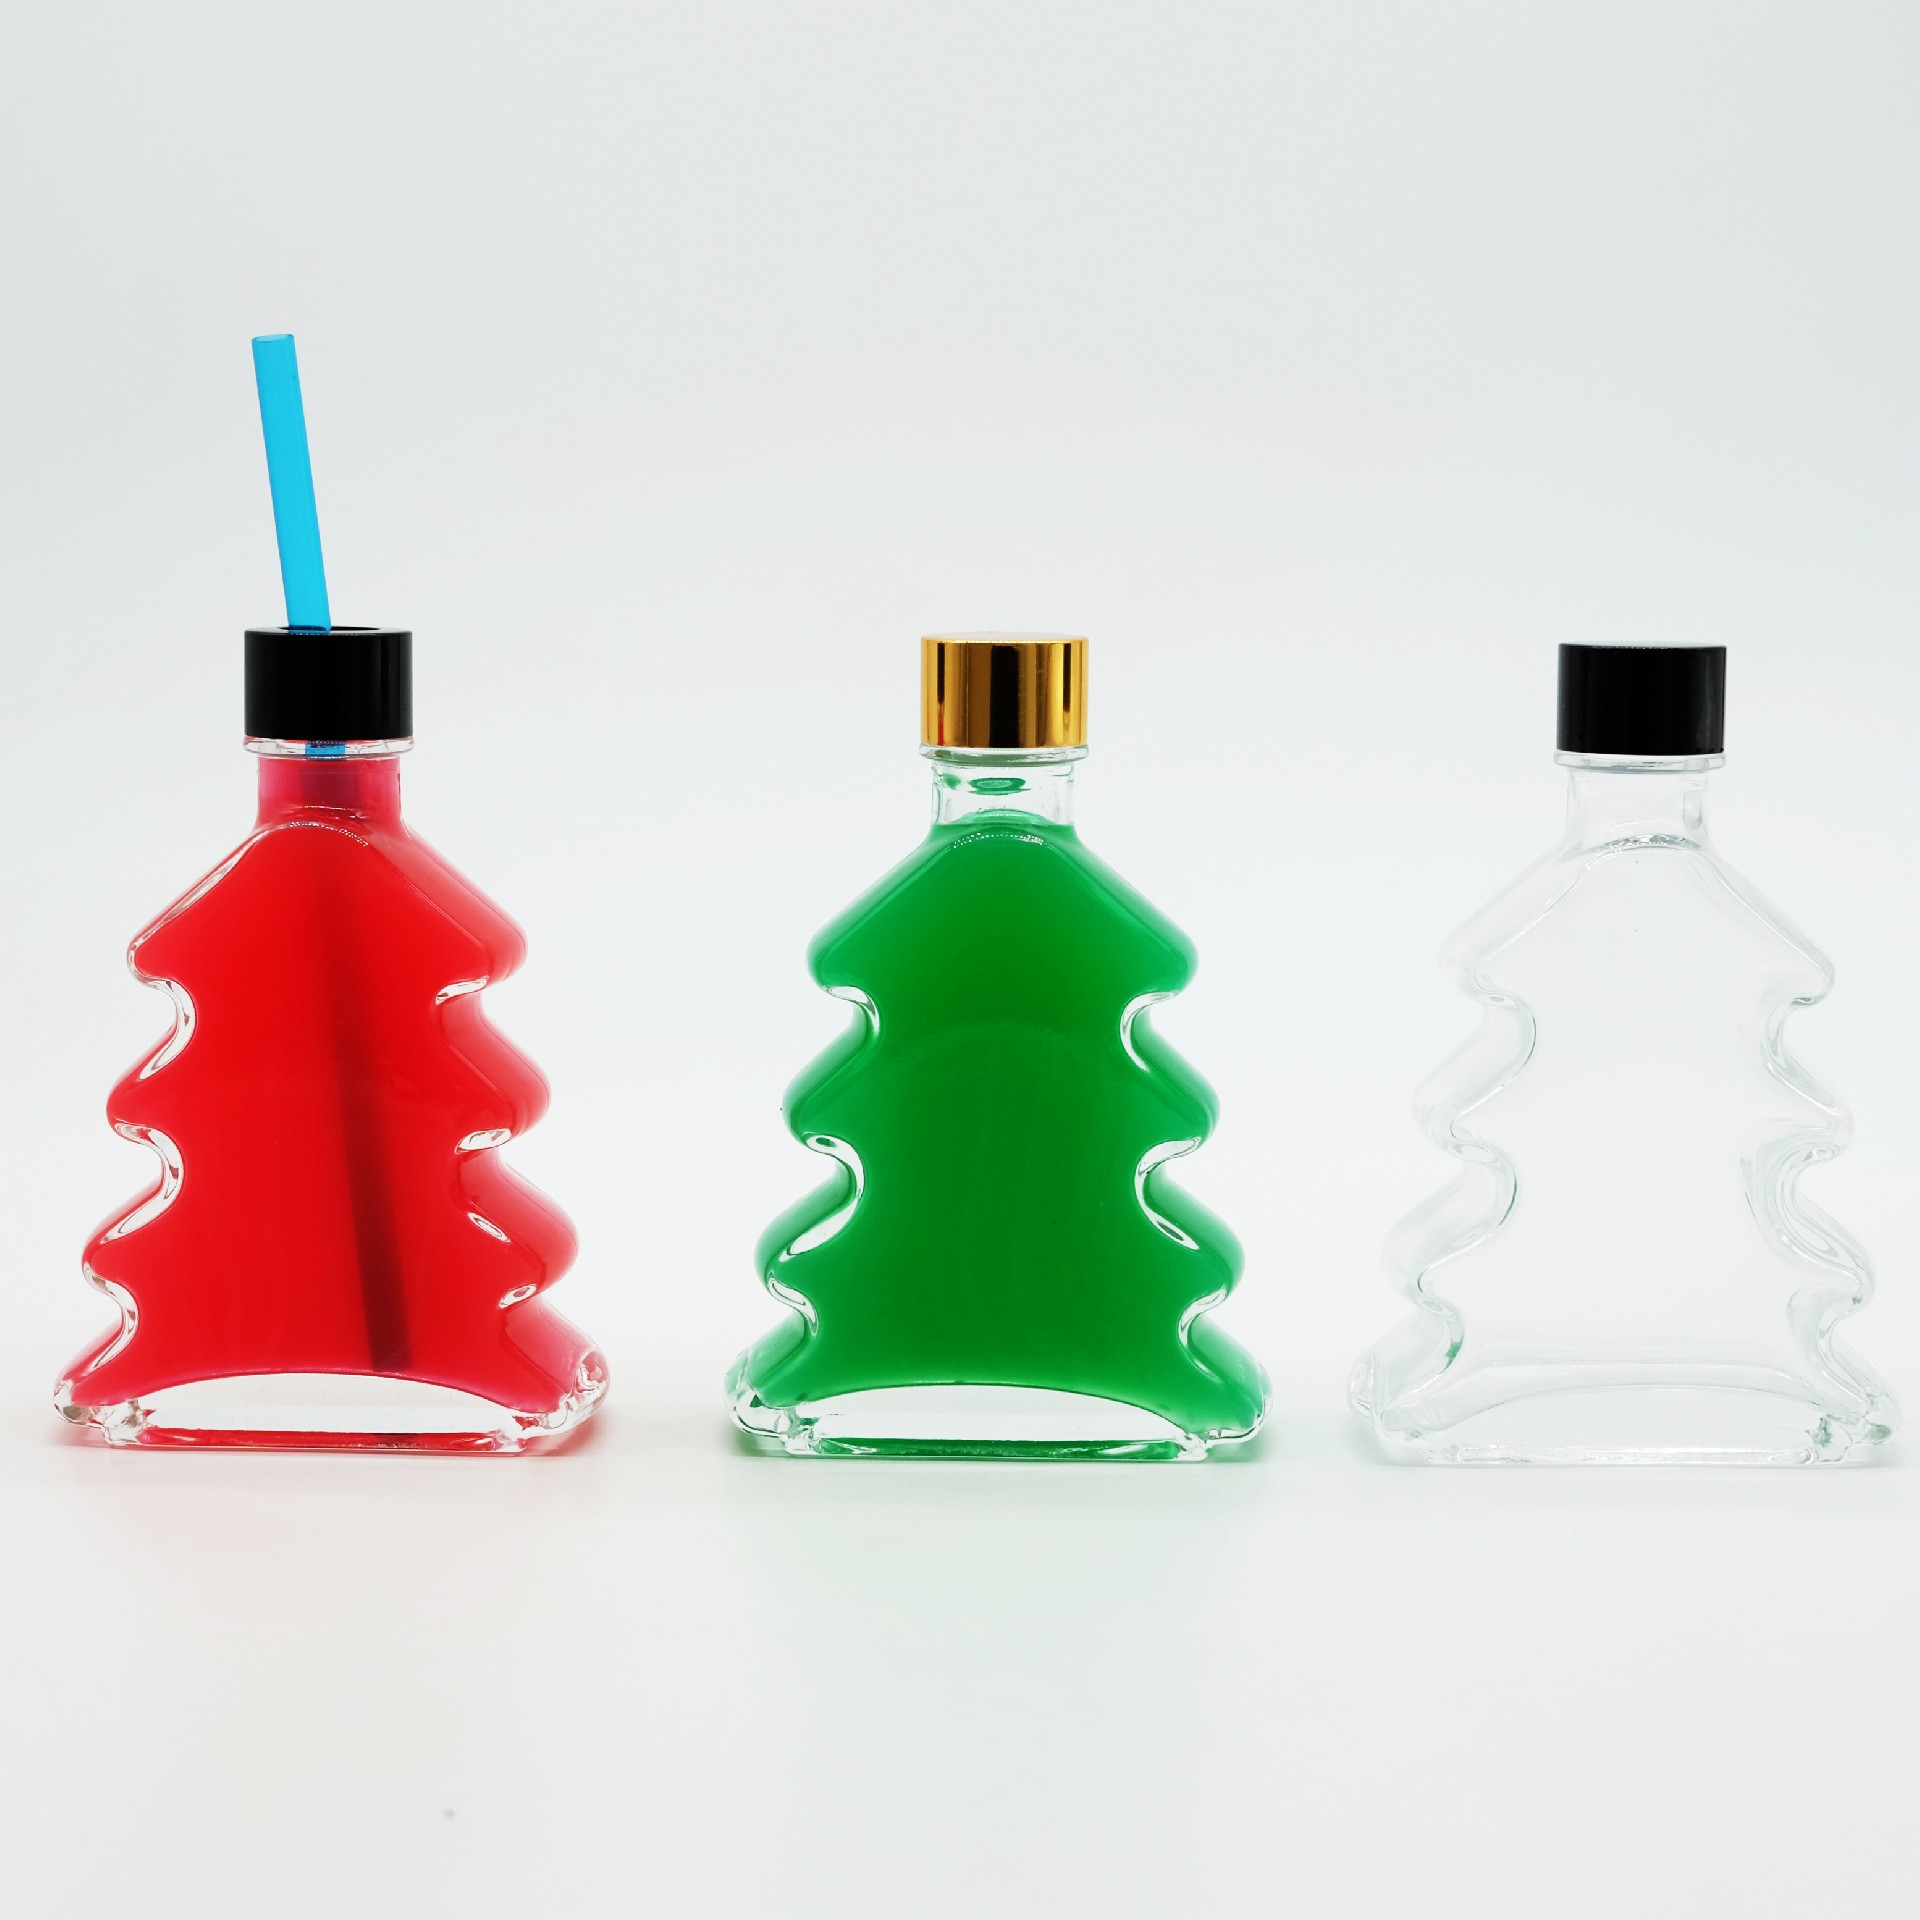 Special Tree Shaped Glass Bottle with Cap